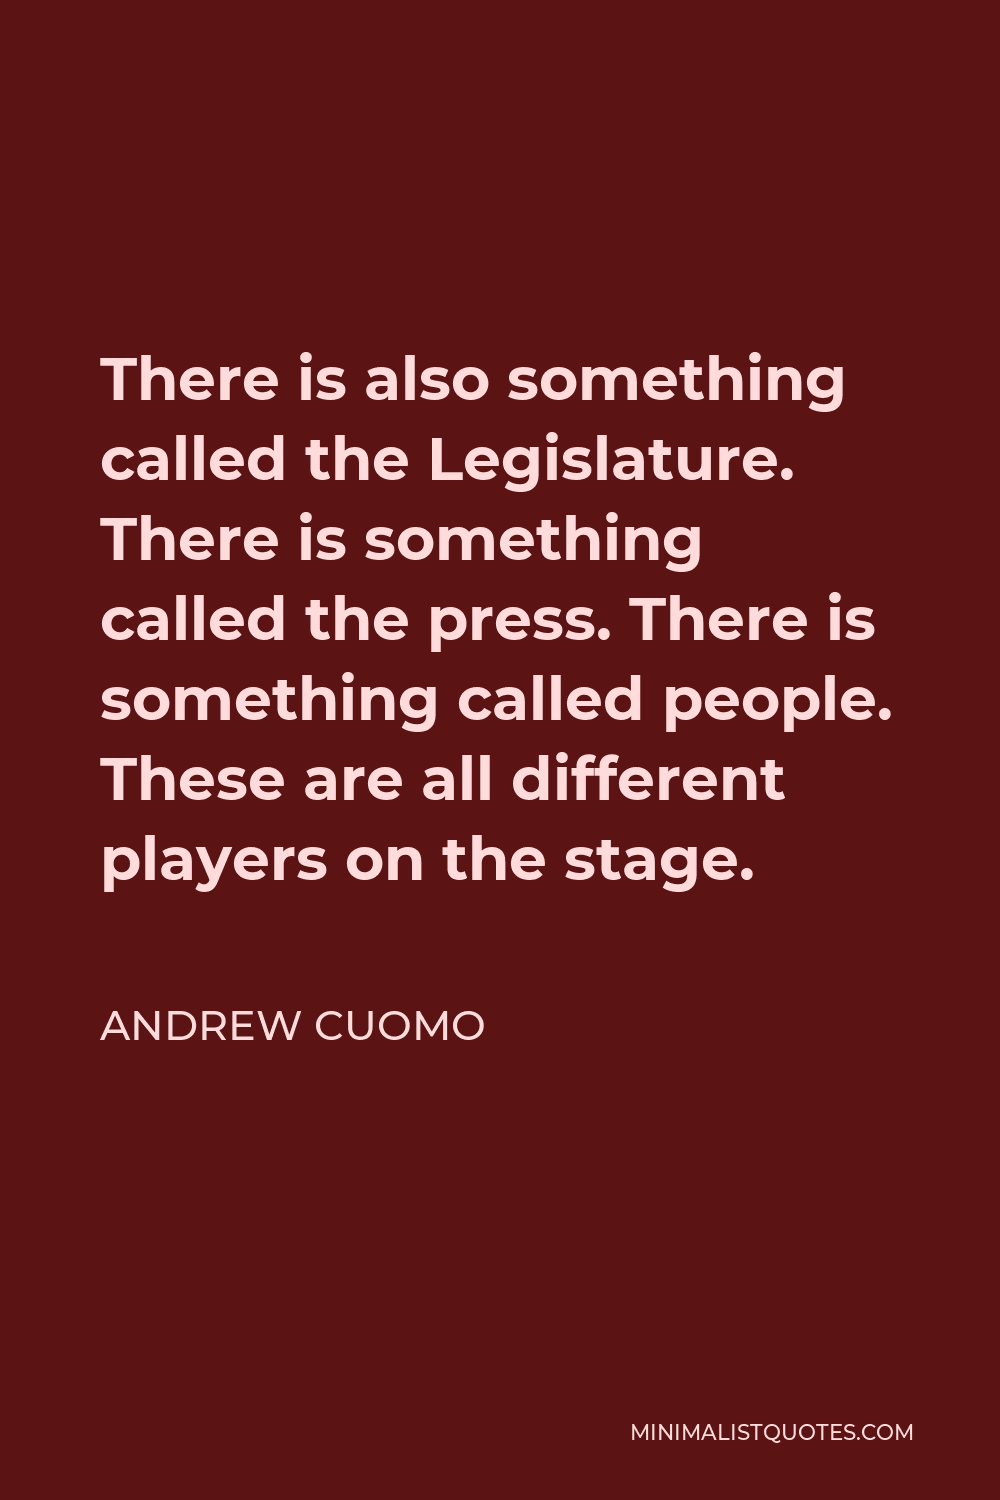 Andrew Cuomo Quote - There is also something called the Legislature. There is something called the press. There is something called people. These are all different players on the stage.